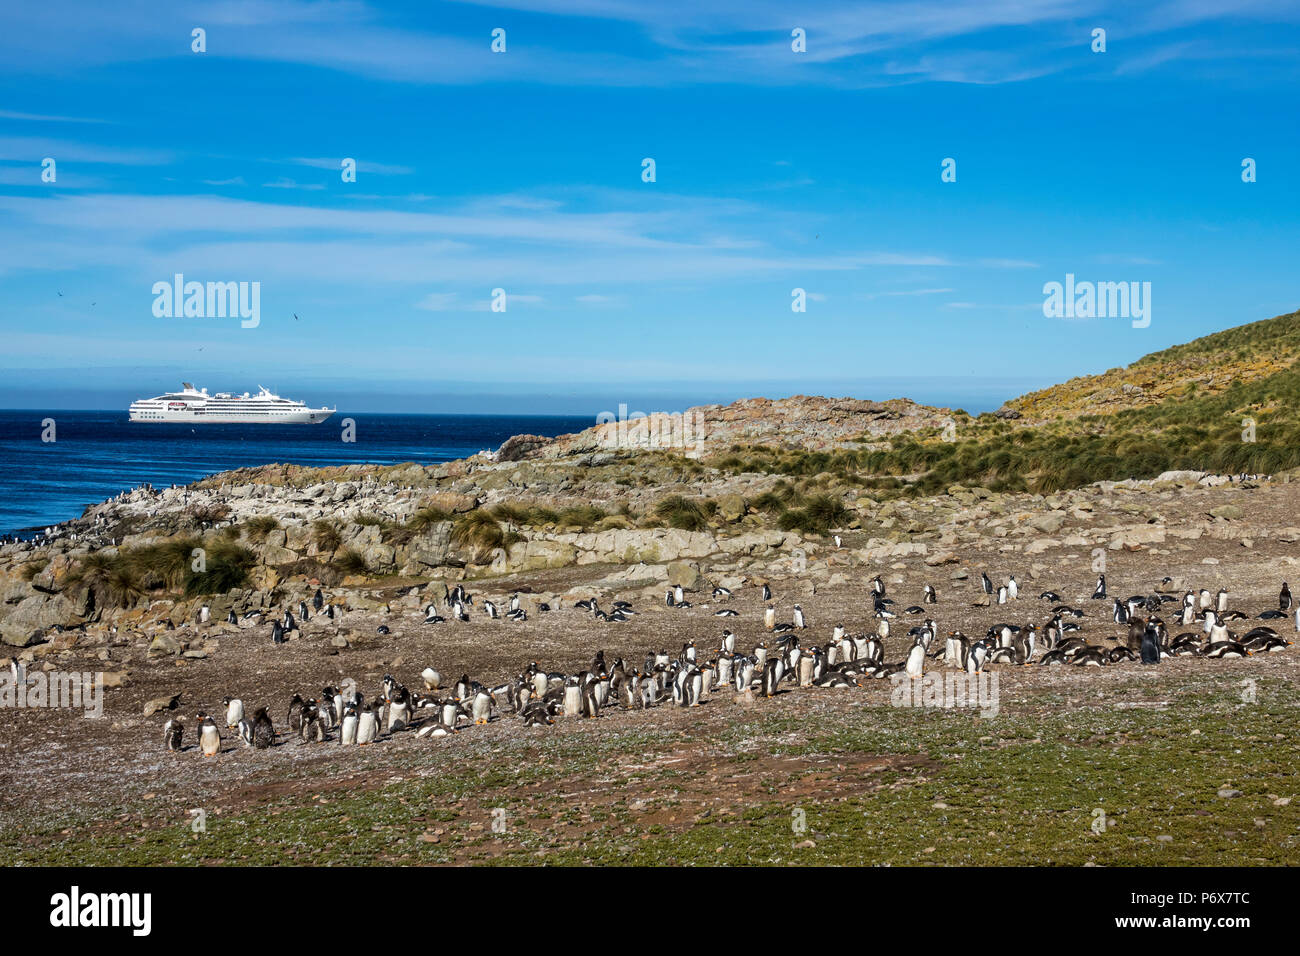 Gentoo penguin colony at Steeple Jason Island, Falkland Islands, with expedition cruise ship Le Lyrial in the background Stock Photo